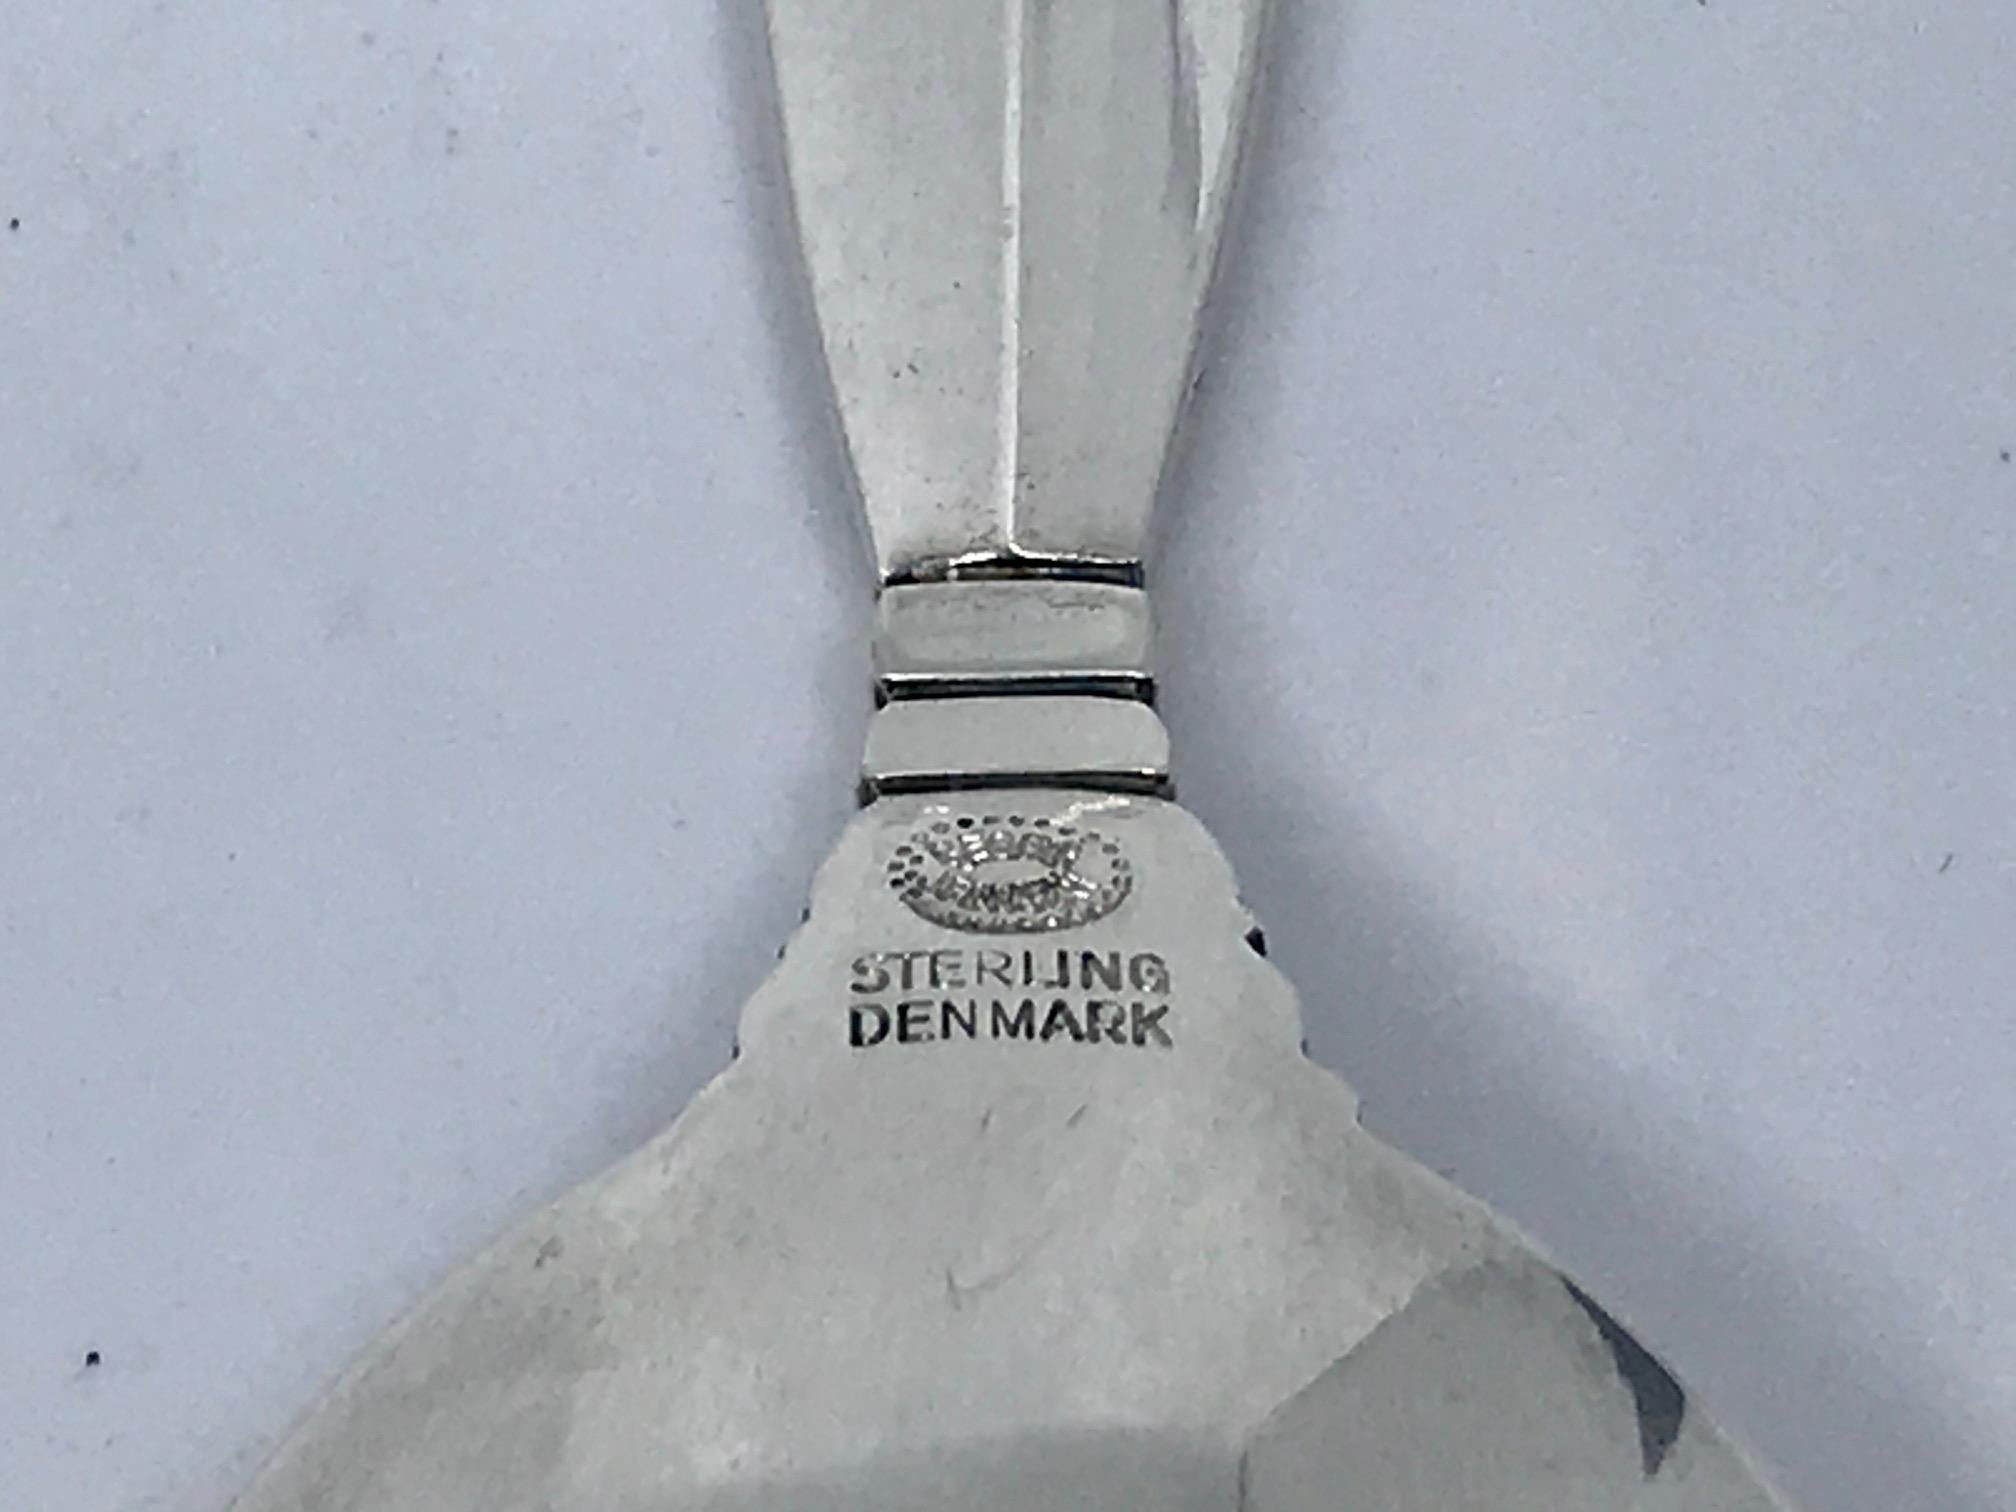 Sterling silver Georg Jensen sugar shovel, item #172 in the Acanthus pattern, design #180 by Johan Rohde from 1917.

Additional information:
Material: Sterling silver
Style: Art Nouveau
Hallmarks:  With Georg Jensen hallmark, made in